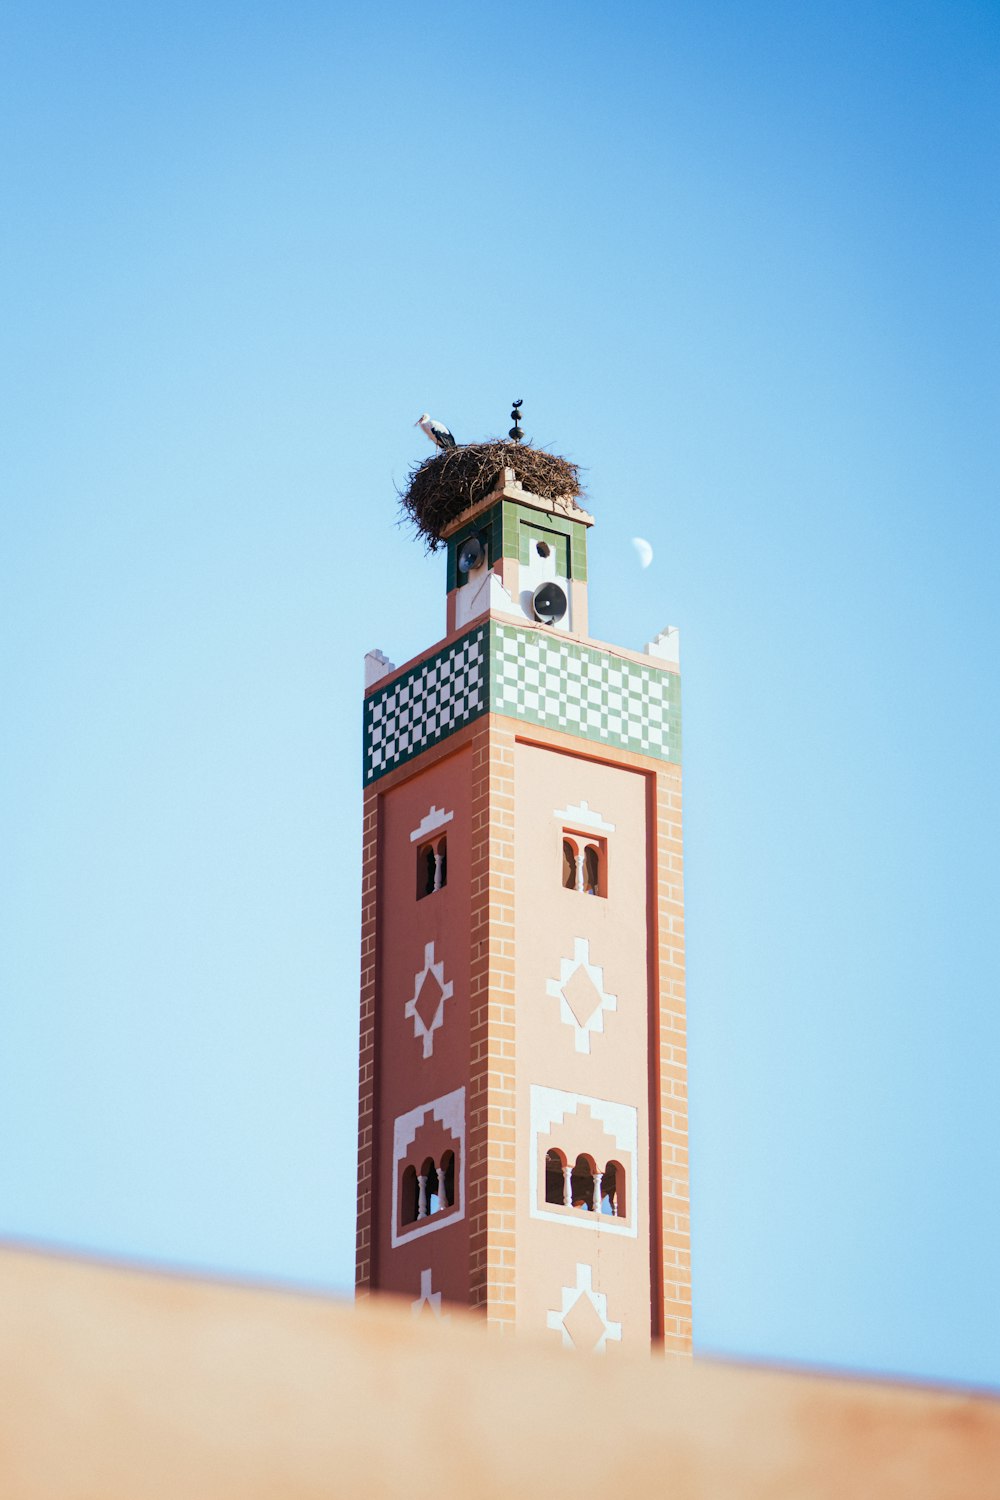 a tall tower with a bird's nest on top of it